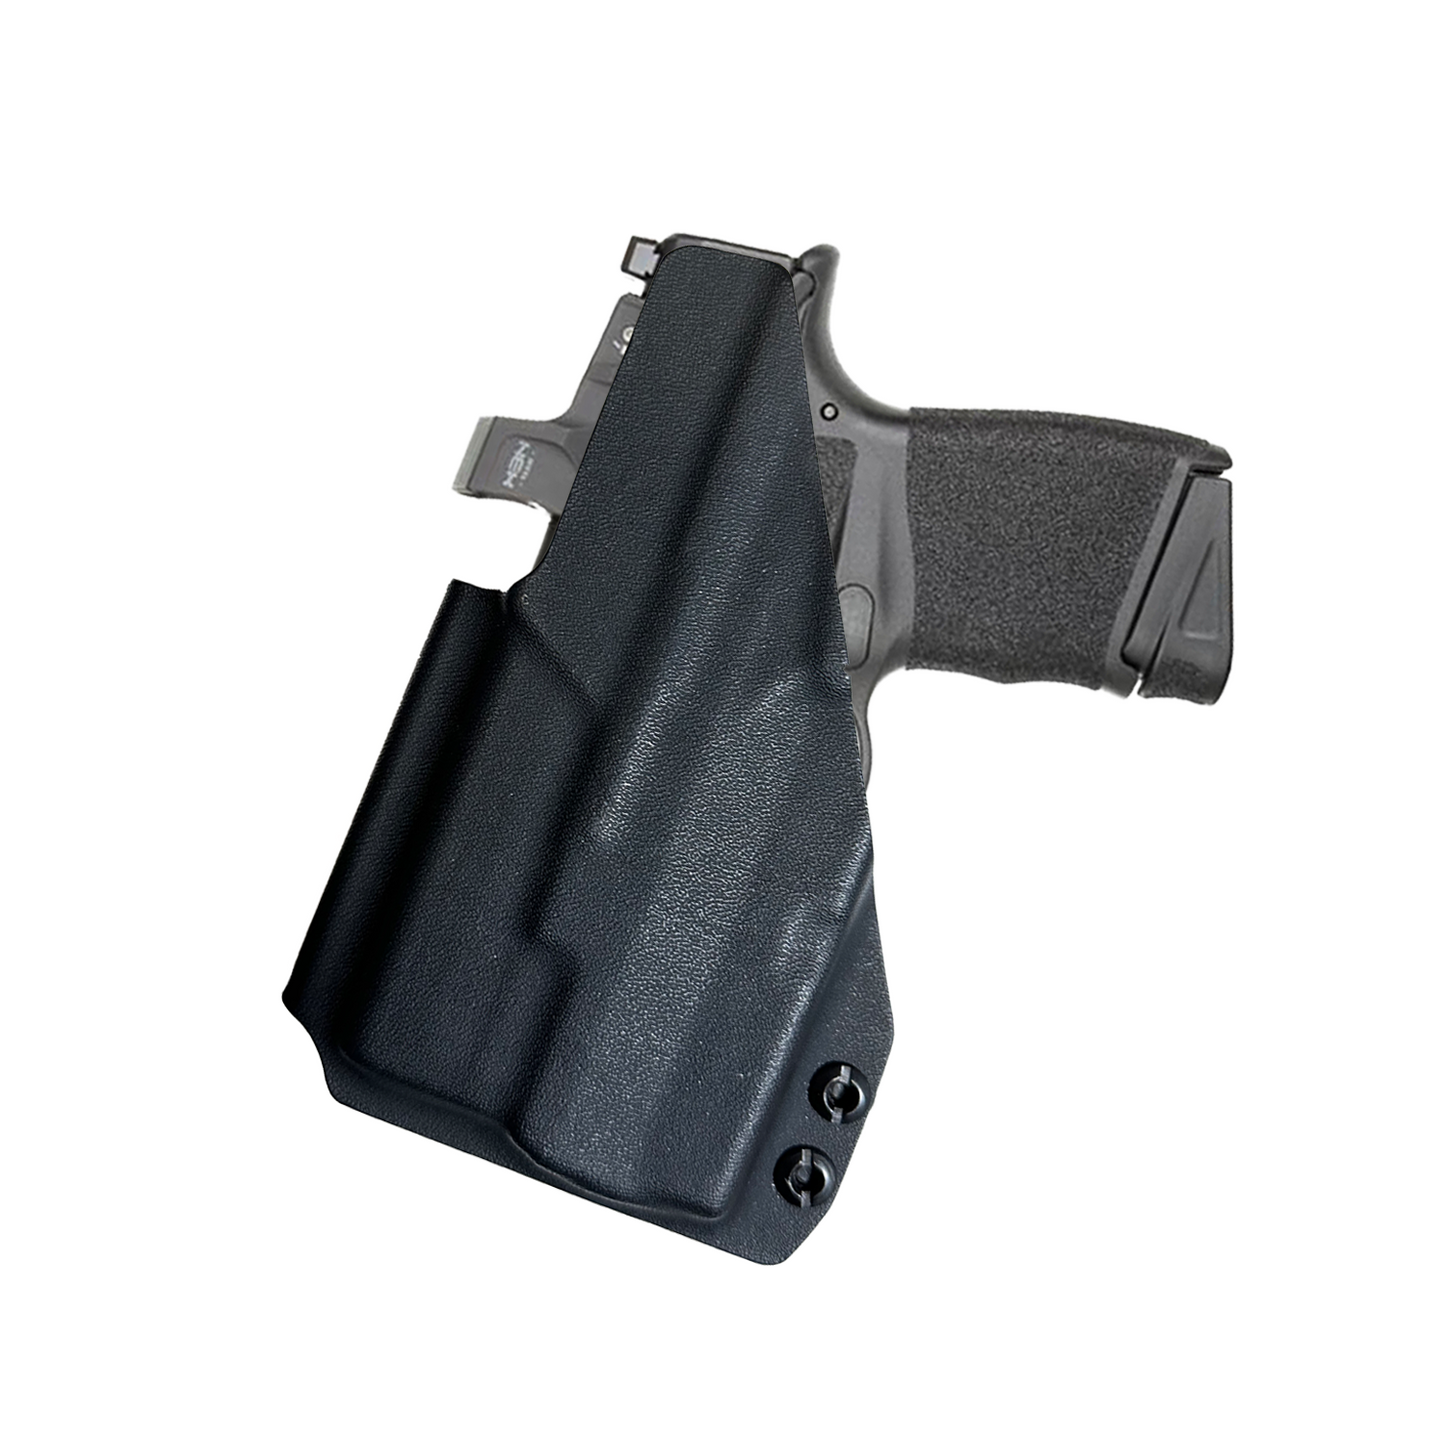 SIG P365XL With LIMA Light/ Laser IWB ( Inside The Waistband Holster)